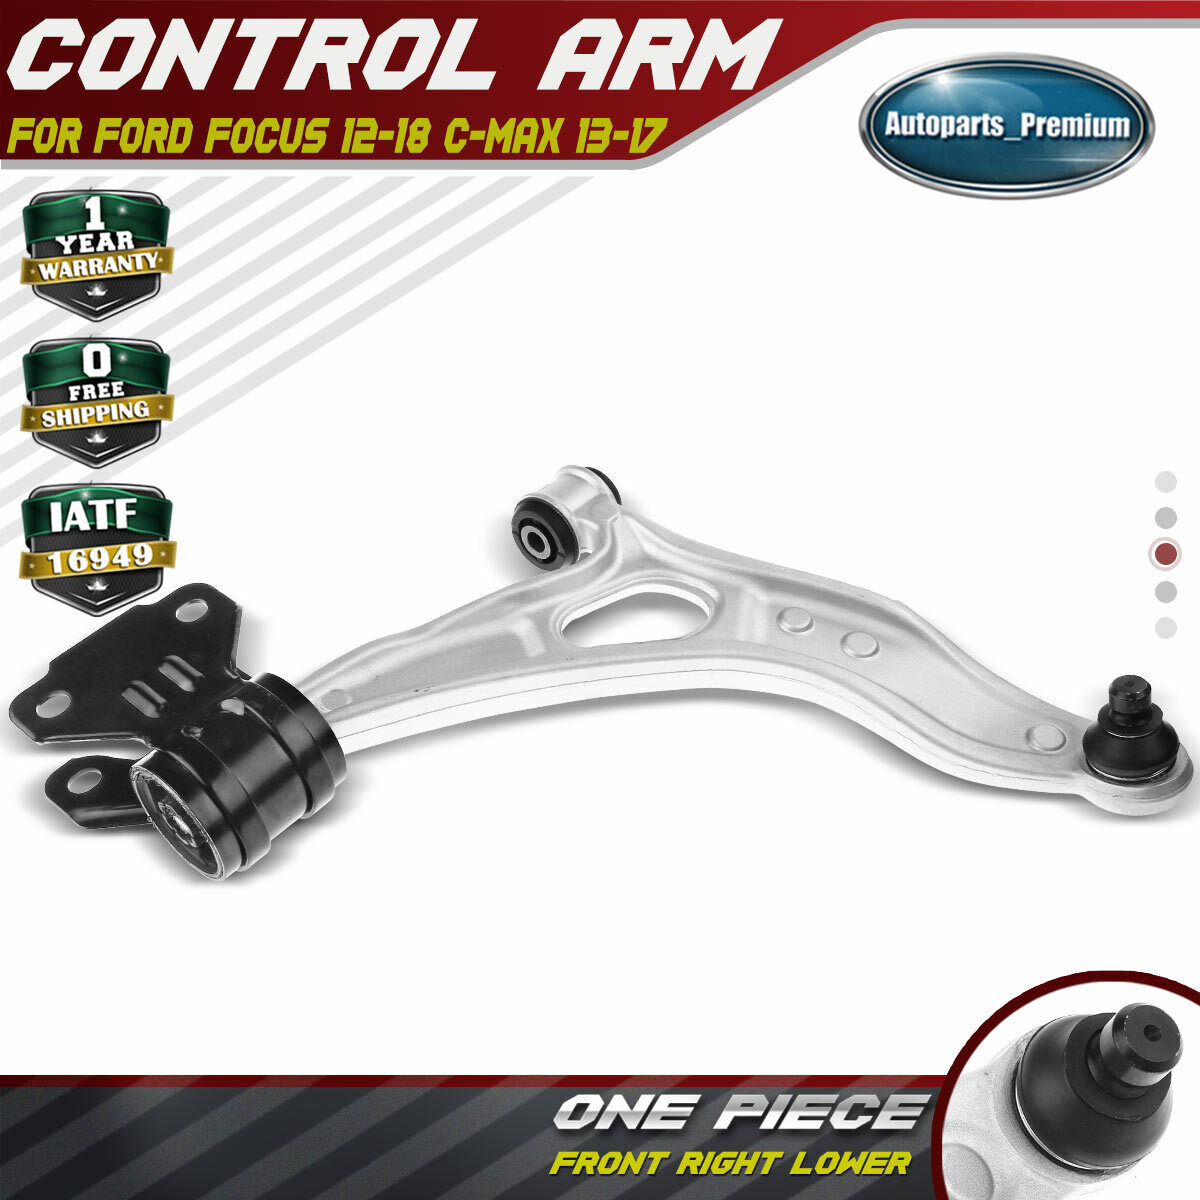 Front Right Lower Aluminum Control Arm w/ Ball Joint for Ford Focus 12-18 C-Max